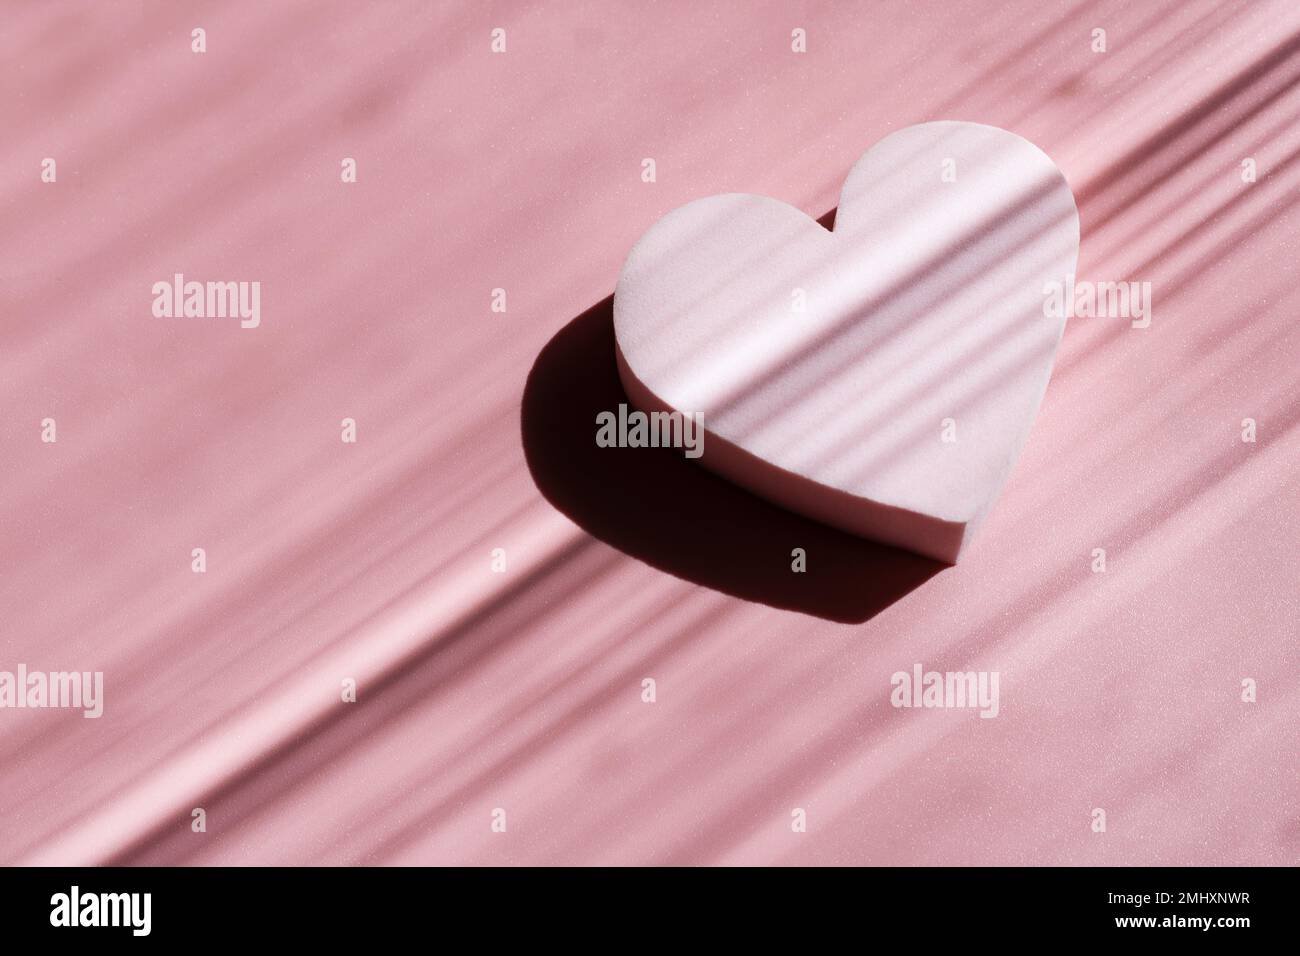 Pink powdery cosmetic sponge in the form of a star on a pink background with deep shadows. Beauty concept. Stock Photo